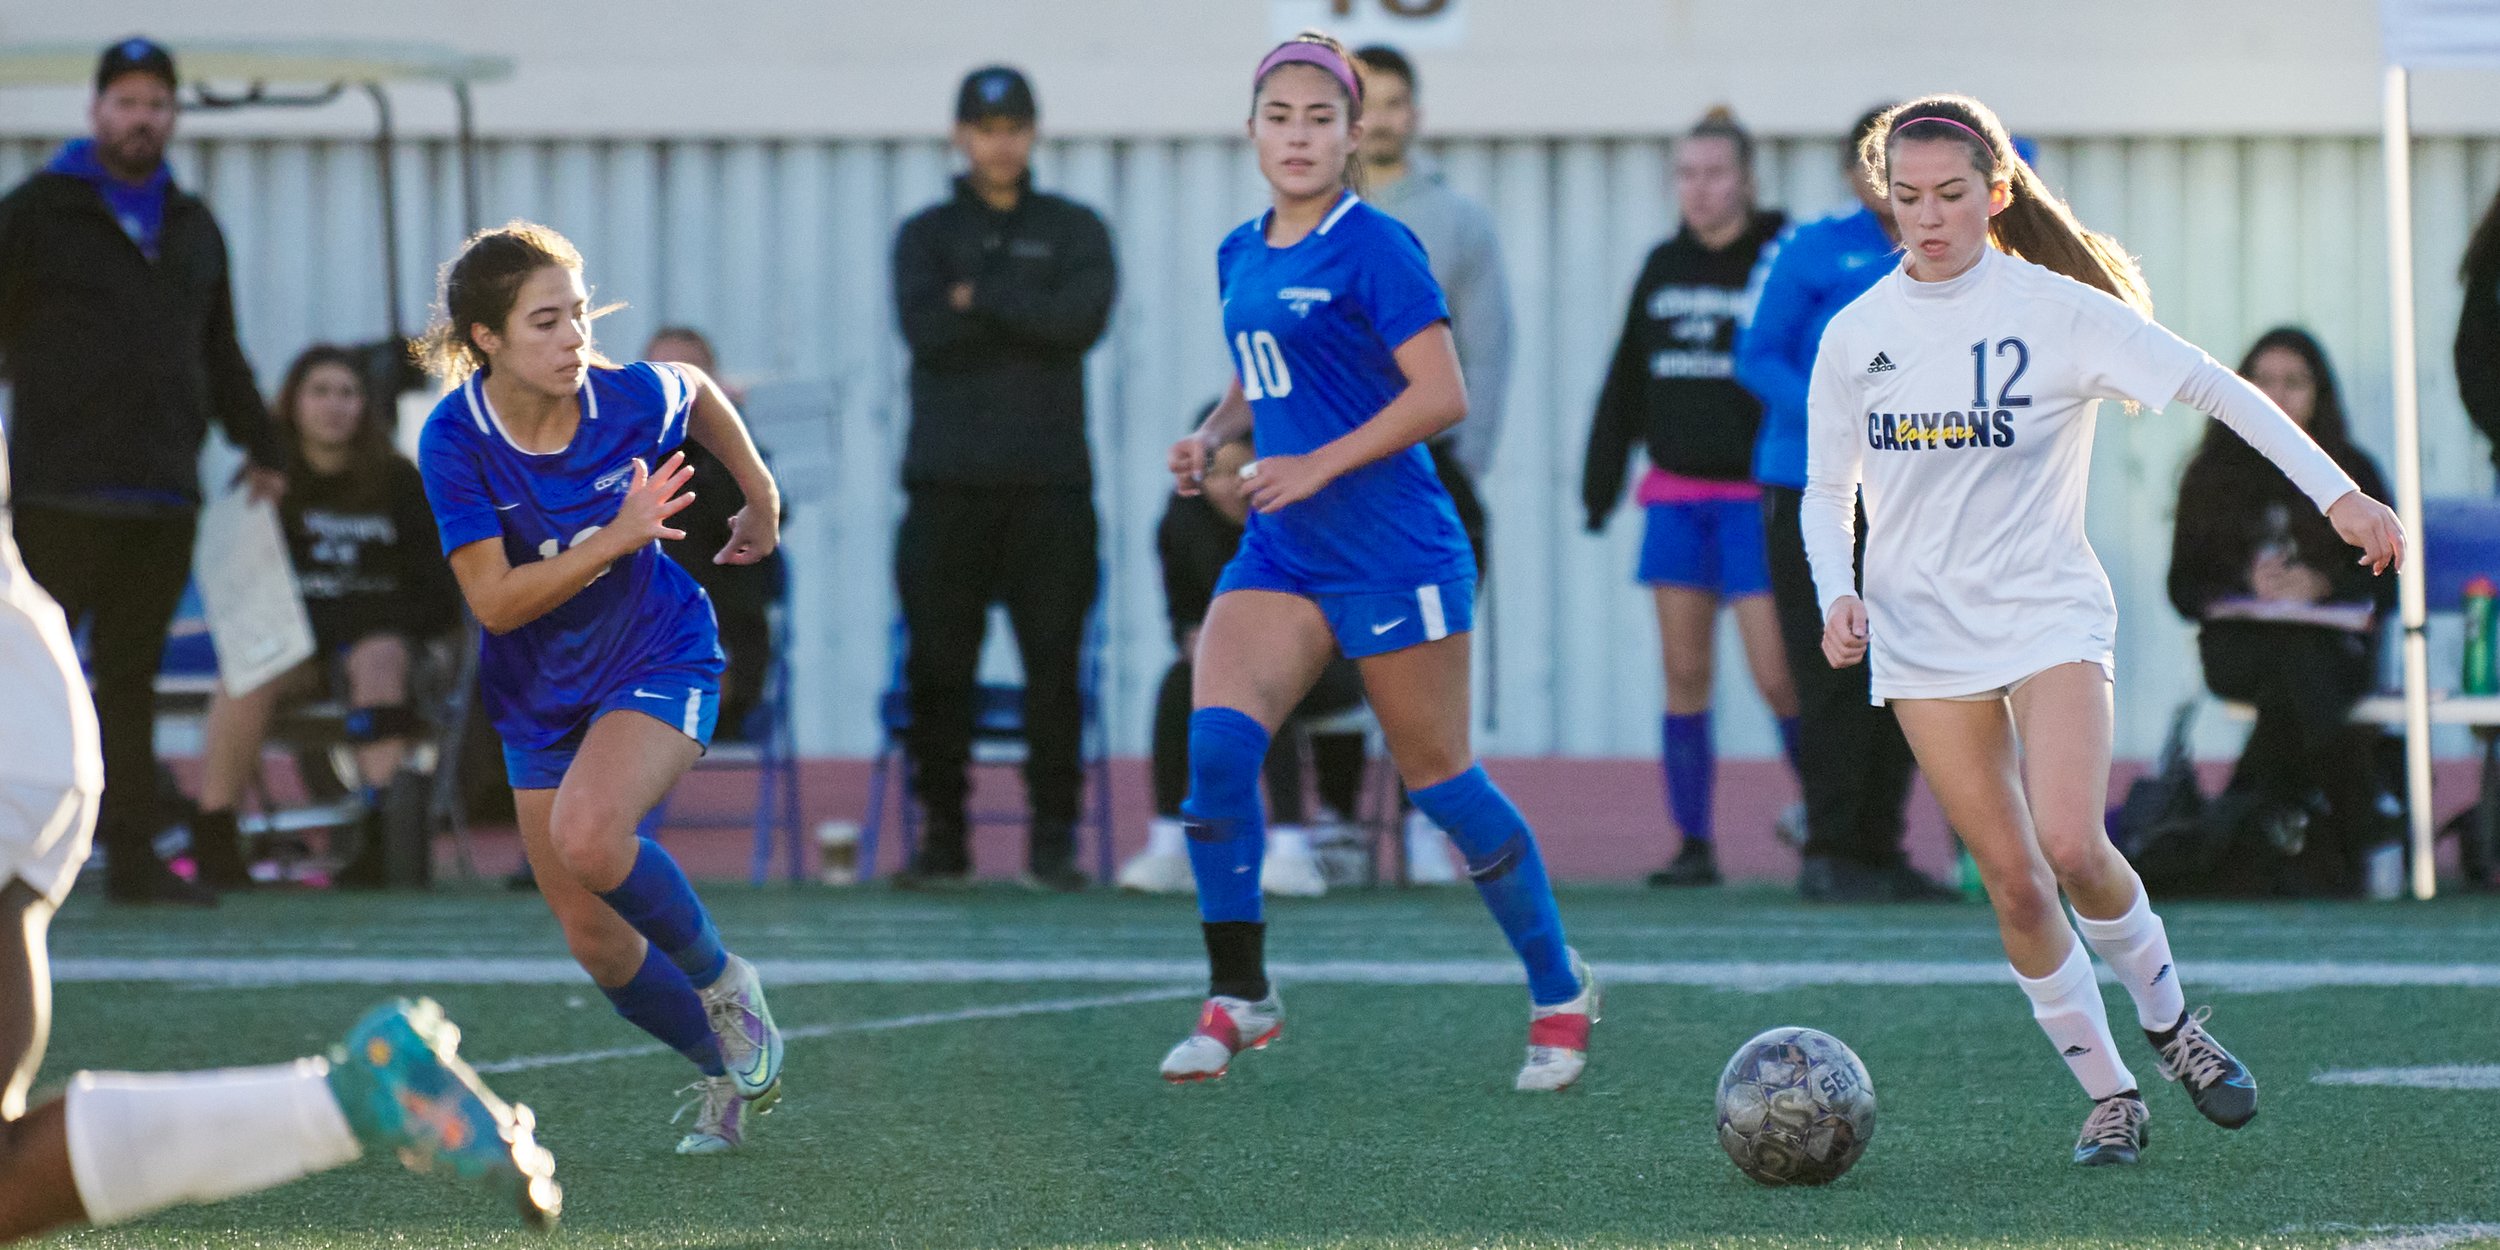  Santa Monica College Corsairs' Sophie Doumitt, Ali Alban, and College of the Canyons Cougars' Jessie Bonsness during the women's soccer match on Thursday, Nov. 10, 2022, at Corsair Field in Santa Monica, Calif. The Corsairs lost 3-0. (Nicholas McCal